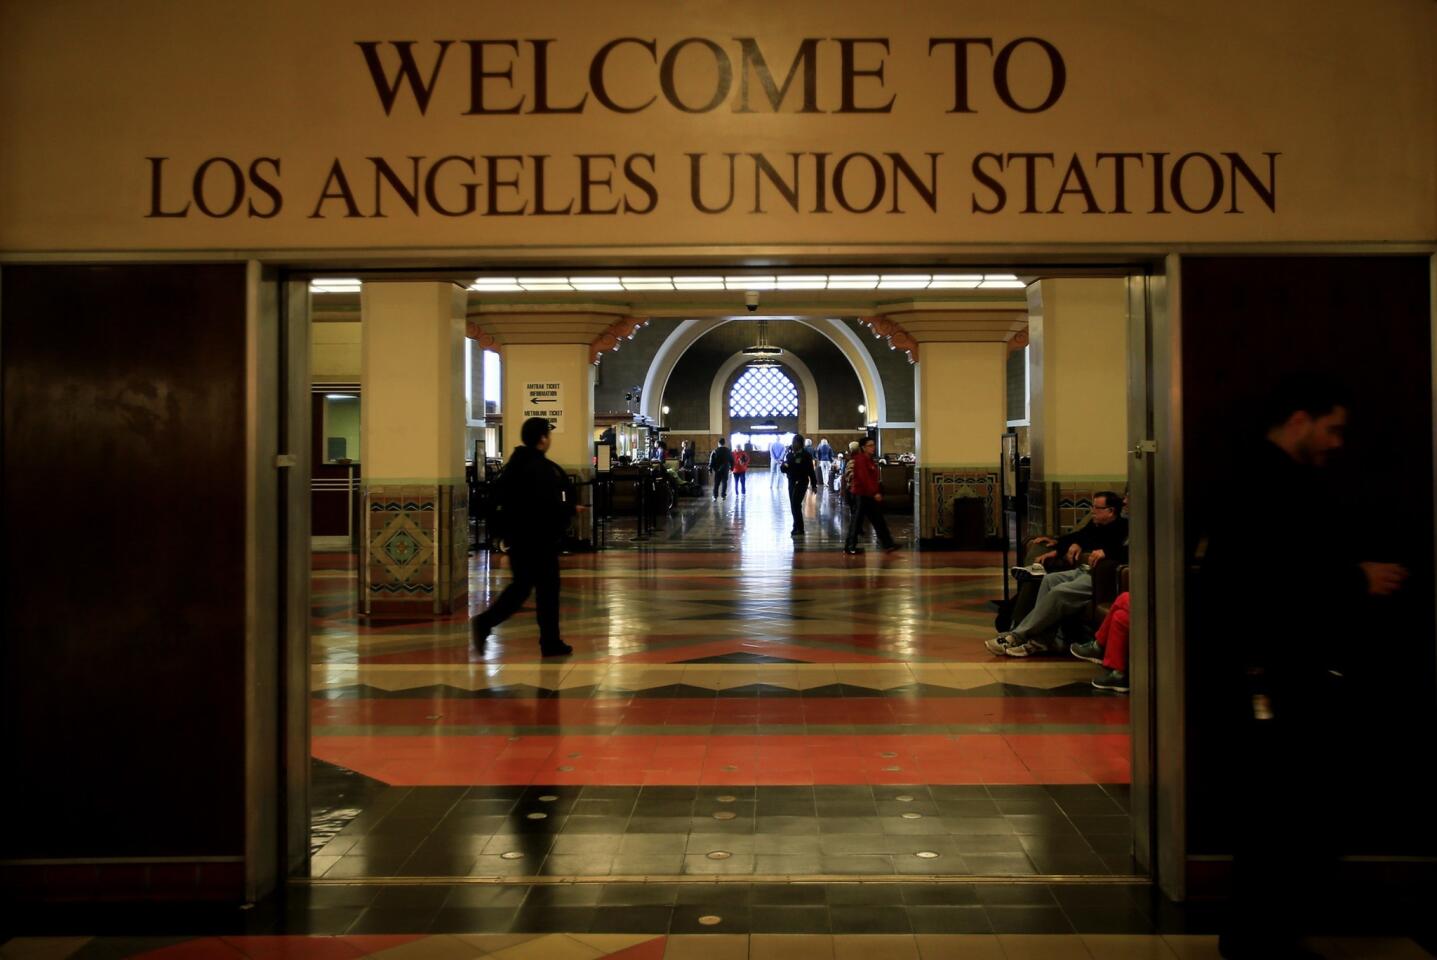 A welcome sign greets passengers arriving to Union Station.